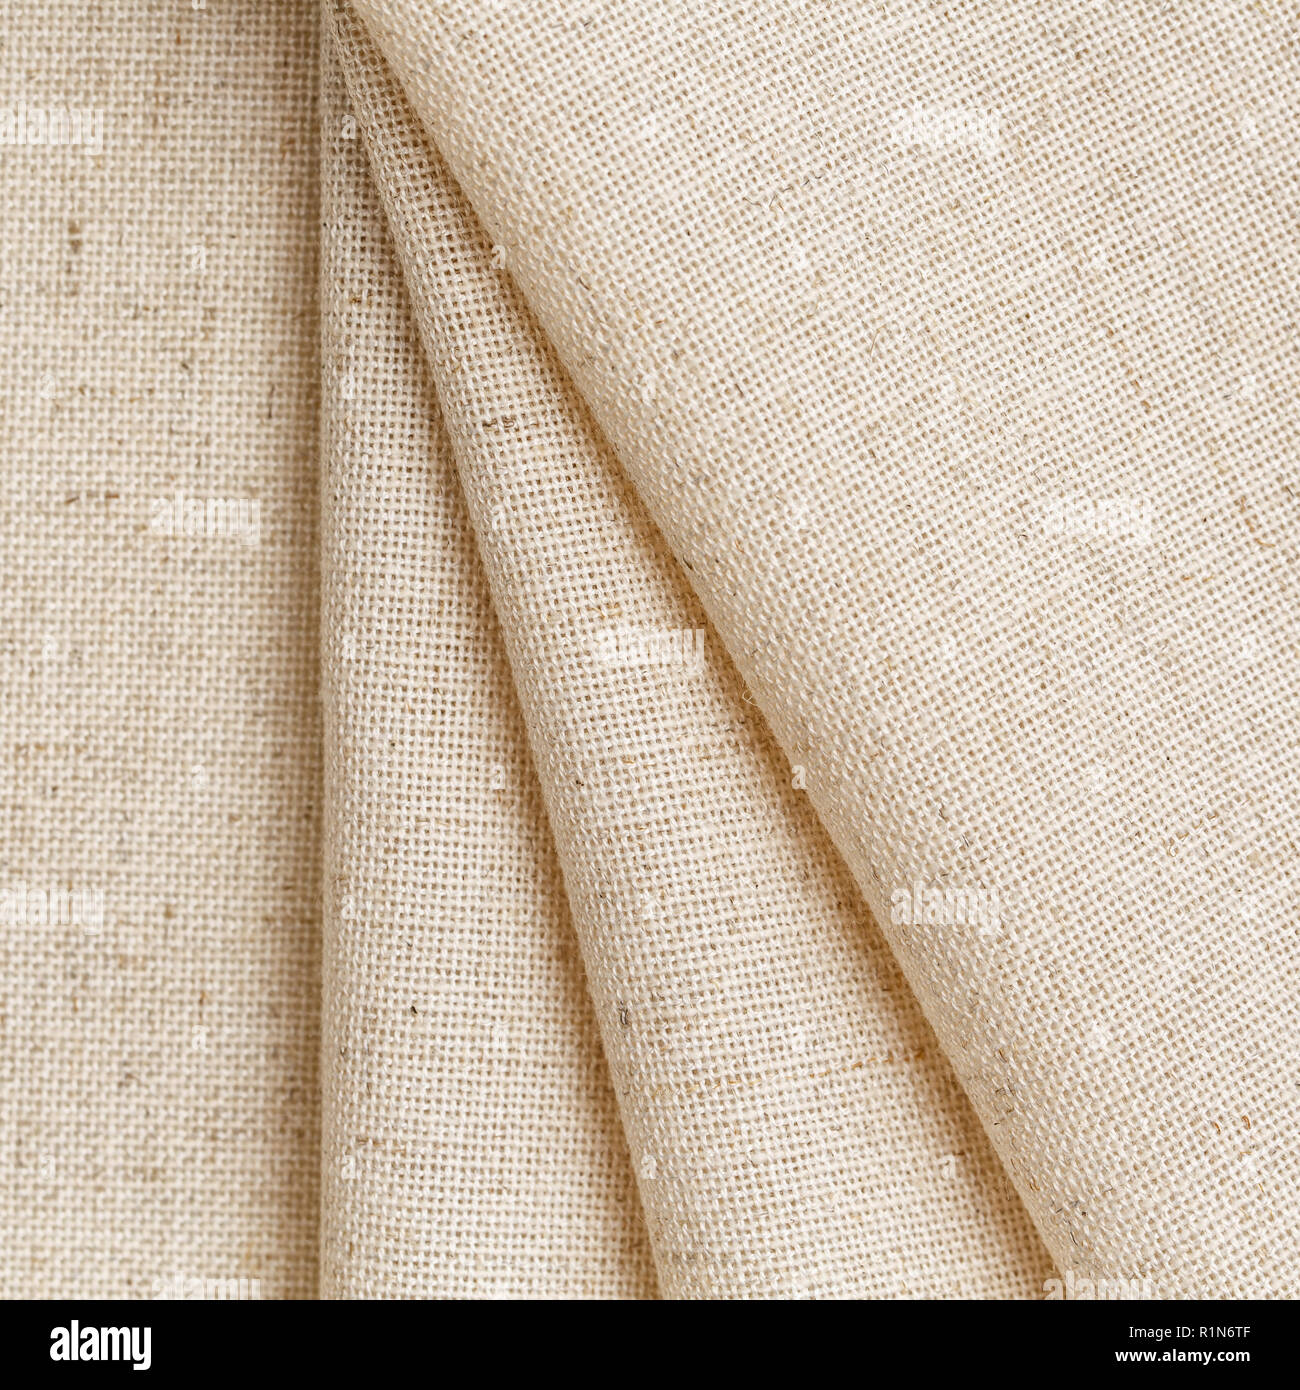 Soft linen fabric for clothing. comfort and practicality clothing Stock Photo